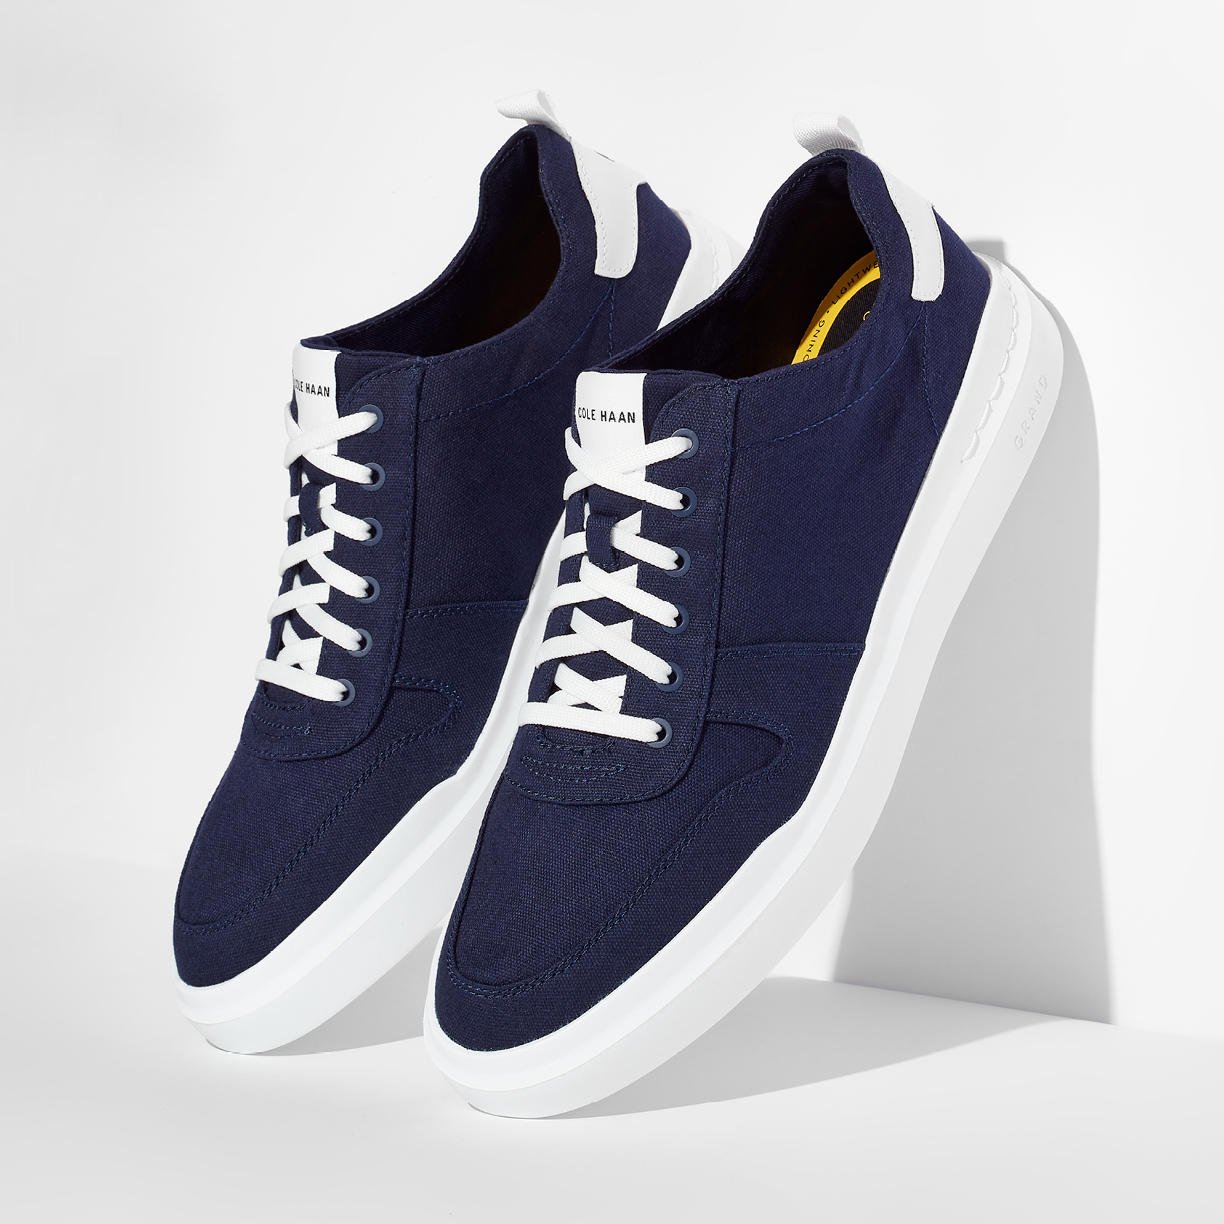 Shoe Shop: Men's On-Trend & Luxe Sneakers Up to 60% Off